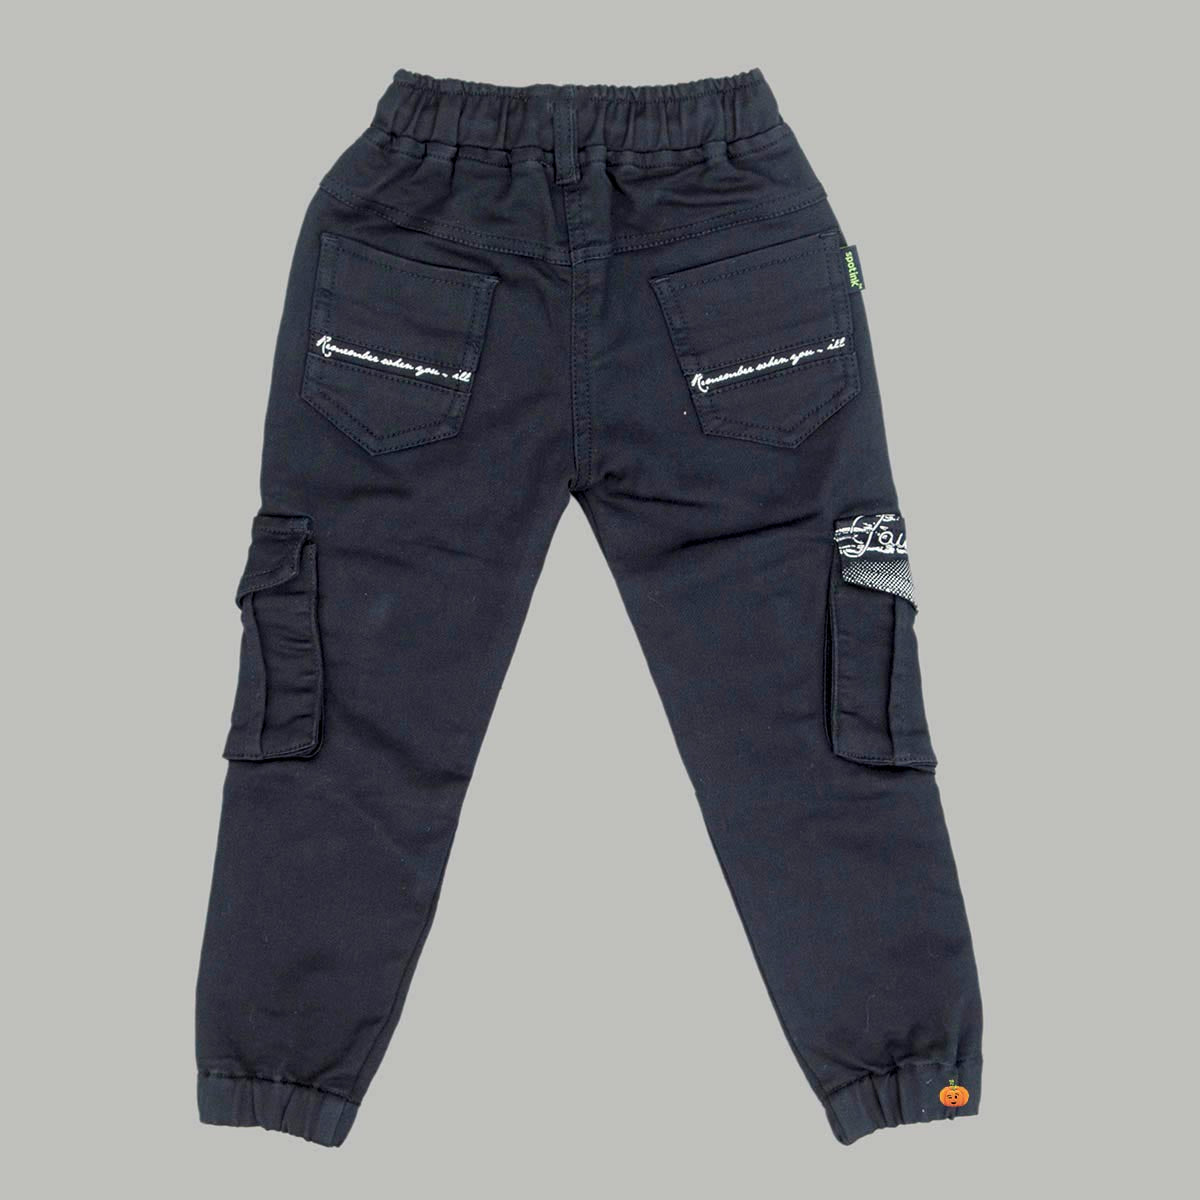 Pull On Skinny Fit Pants Toddler Boys 2t-4t - Light Wash | Levi's® US